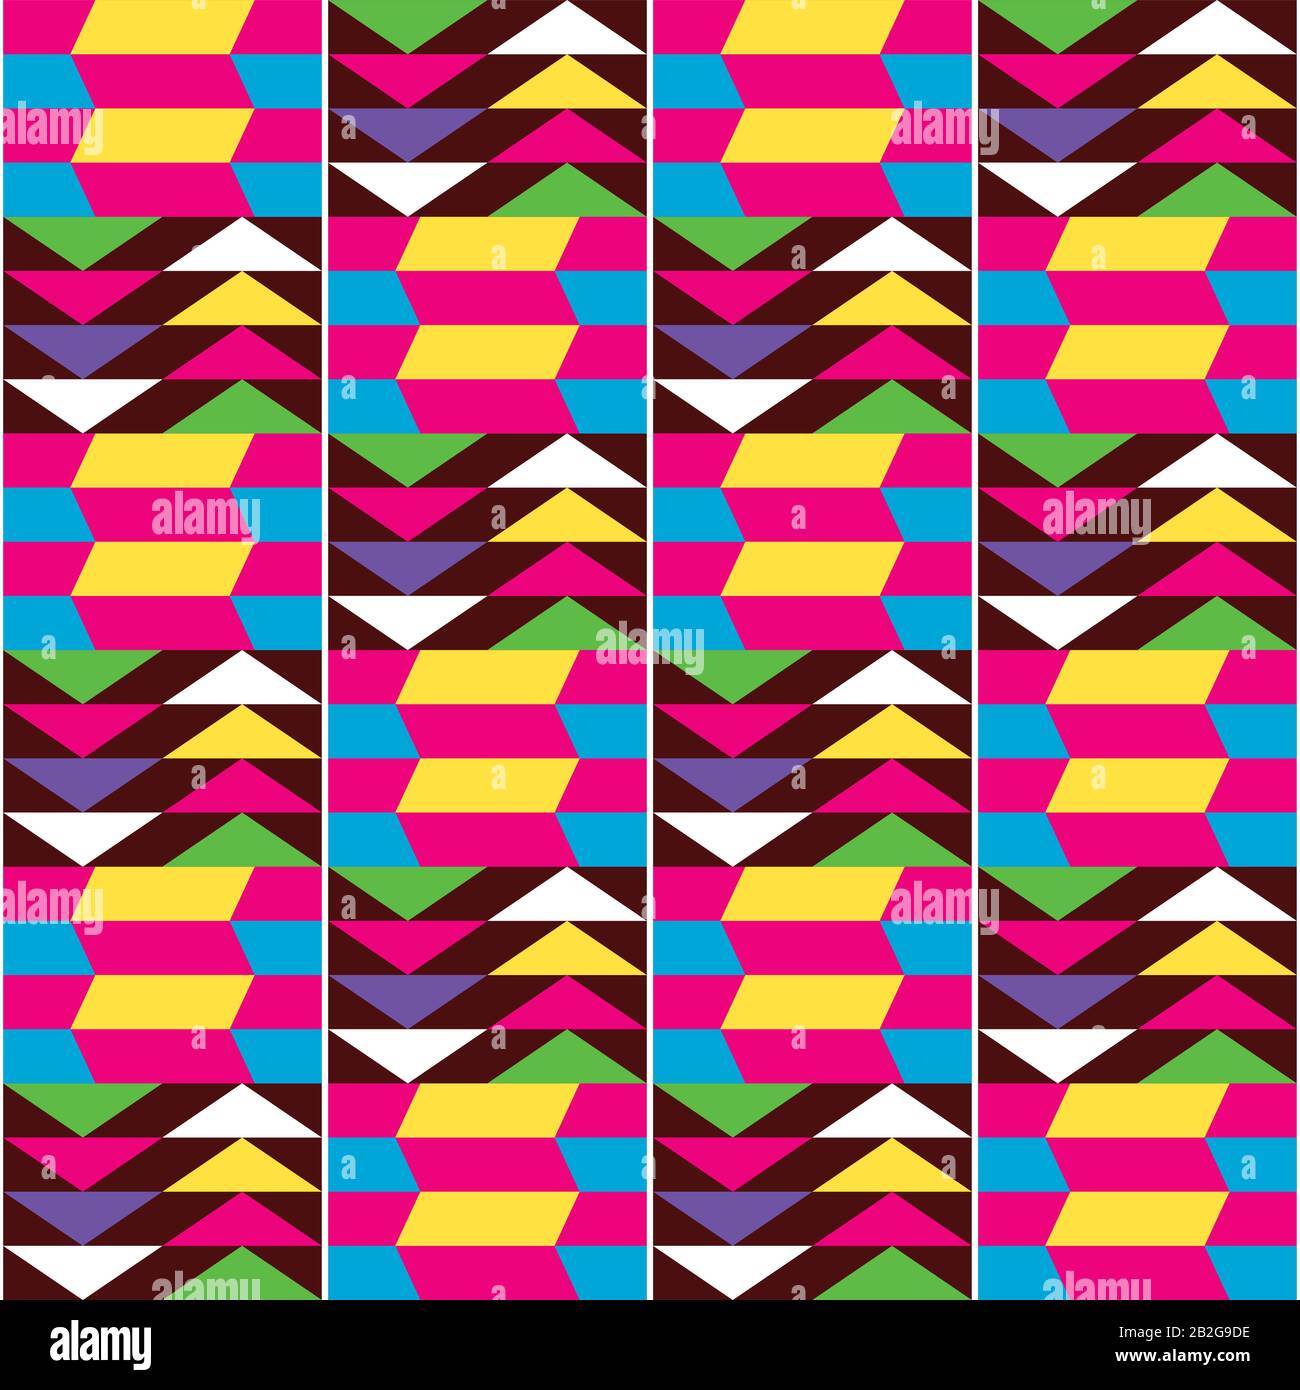 African kente cloth ethnic fabric seamless Vector Image